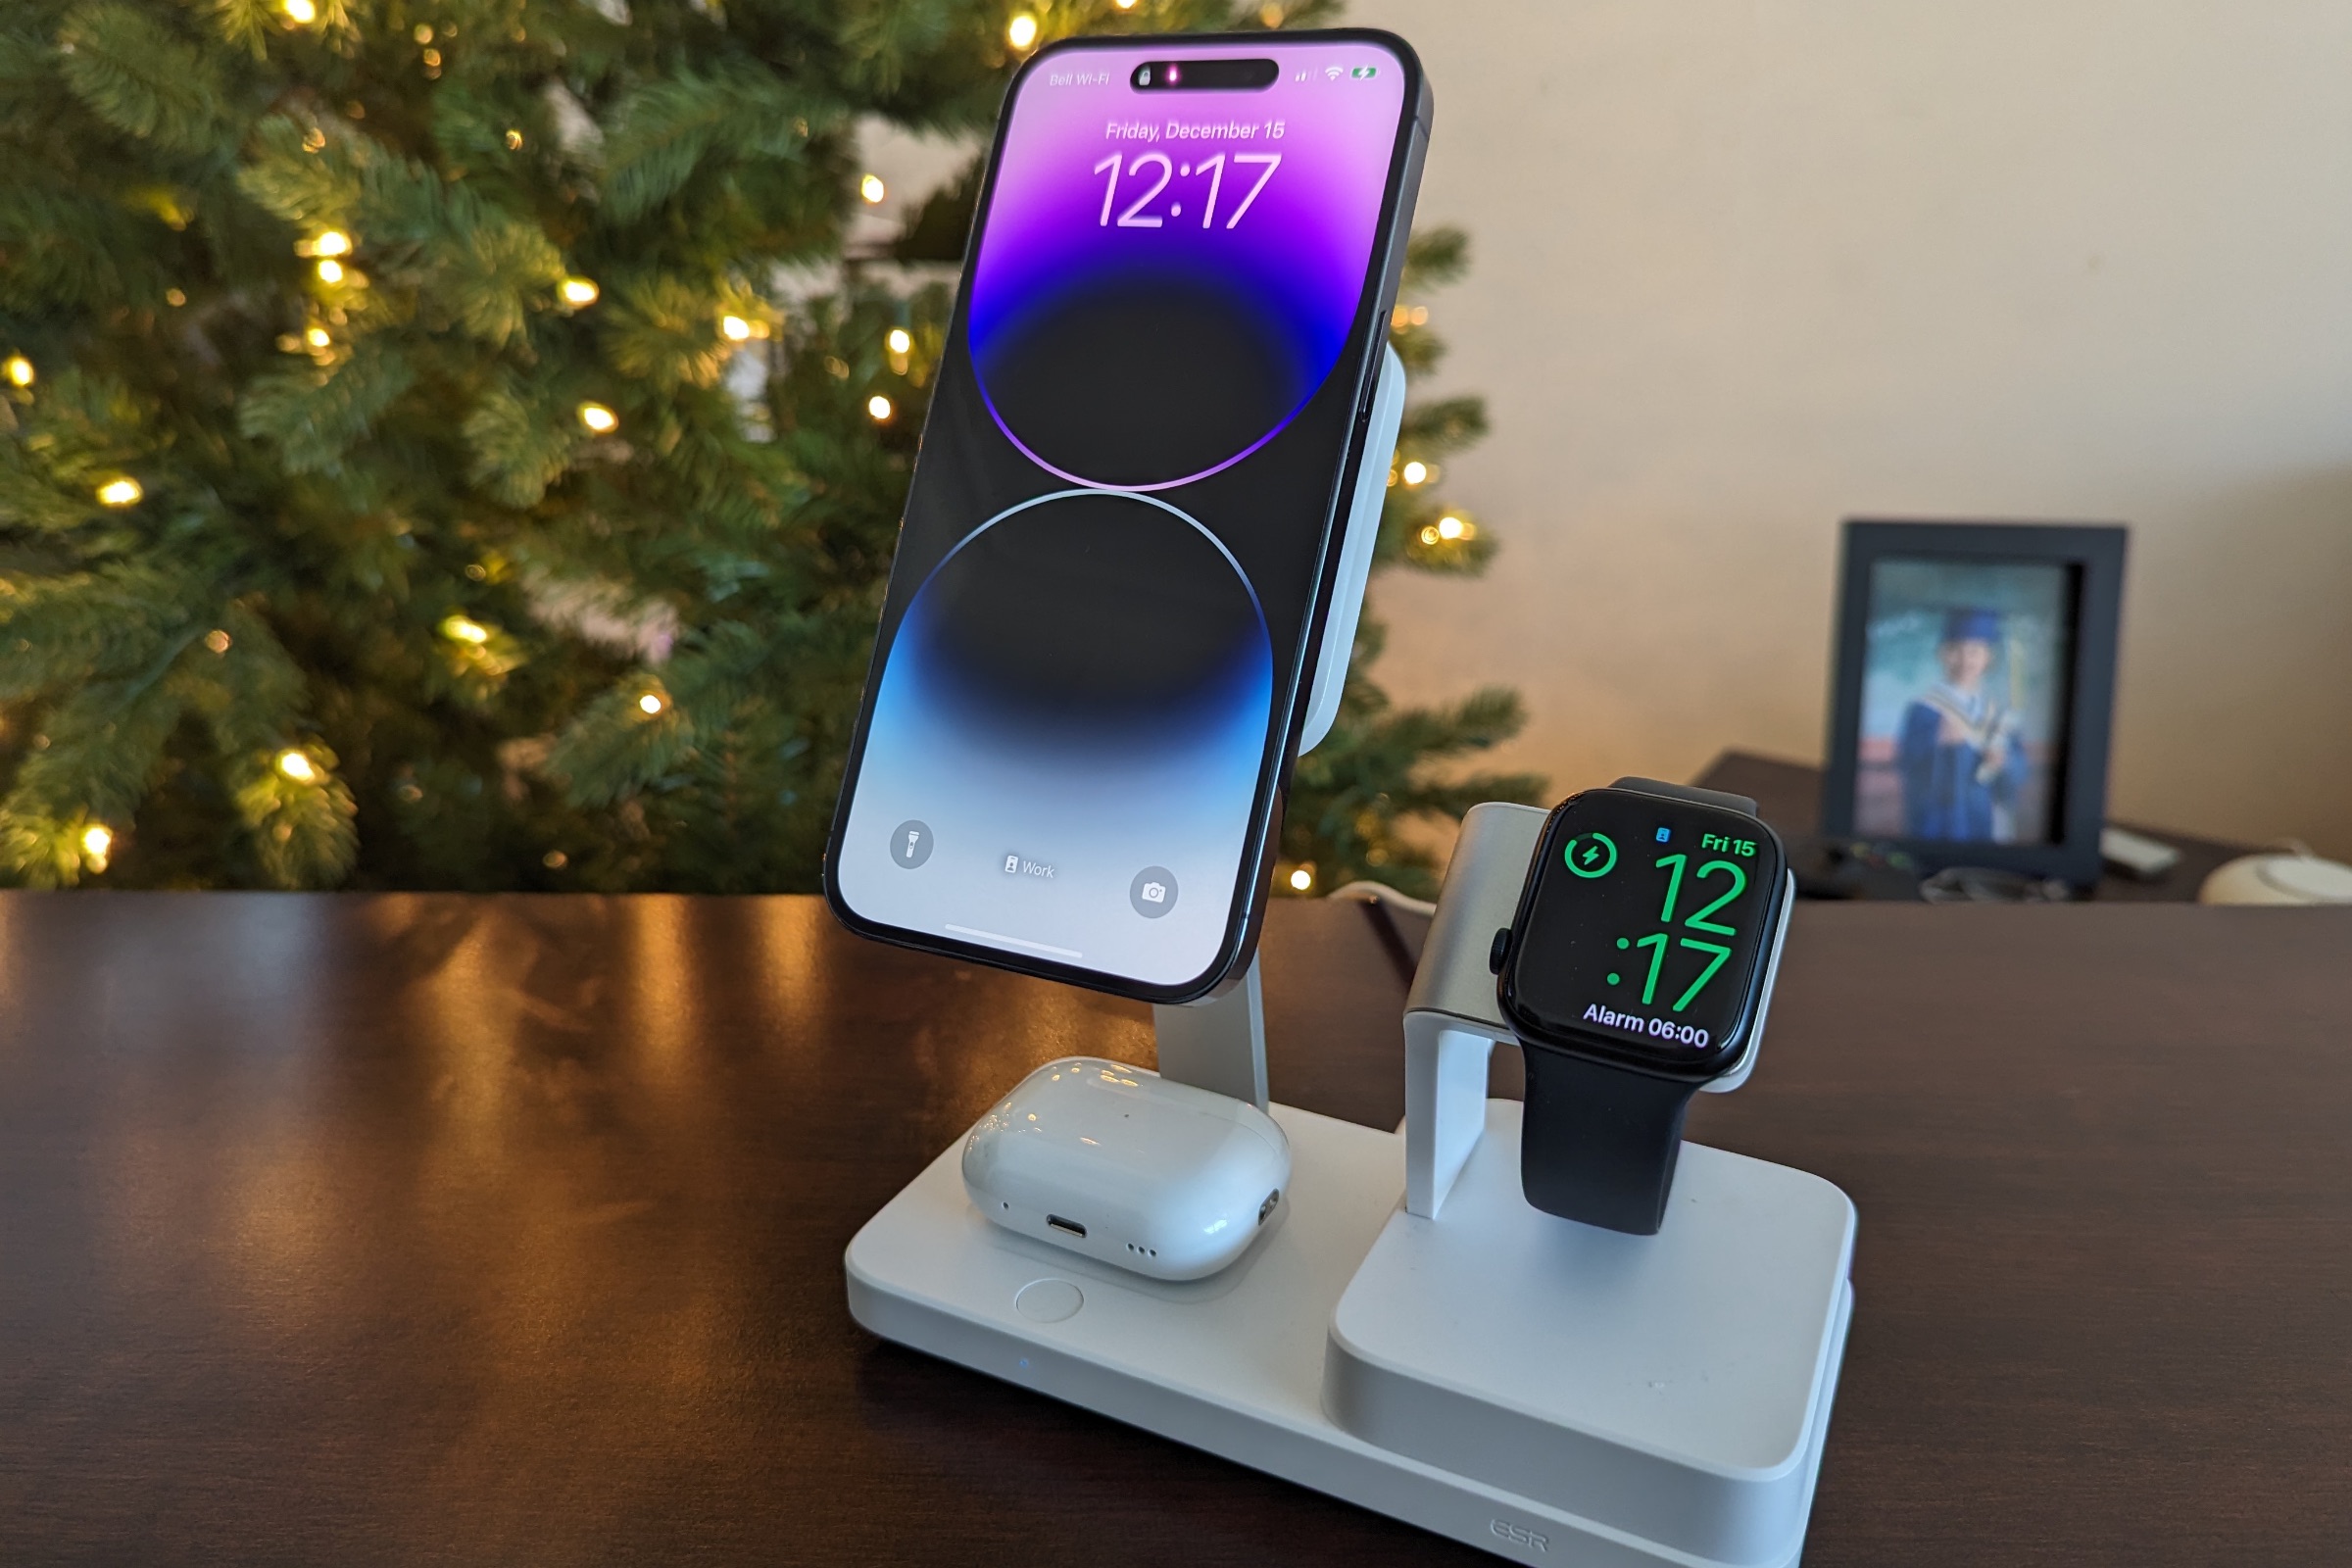 ESR 6-in-1 charging stand with iPhone 14 Pro Max, Apple Watch Series 8, and AirPods Pro docked.